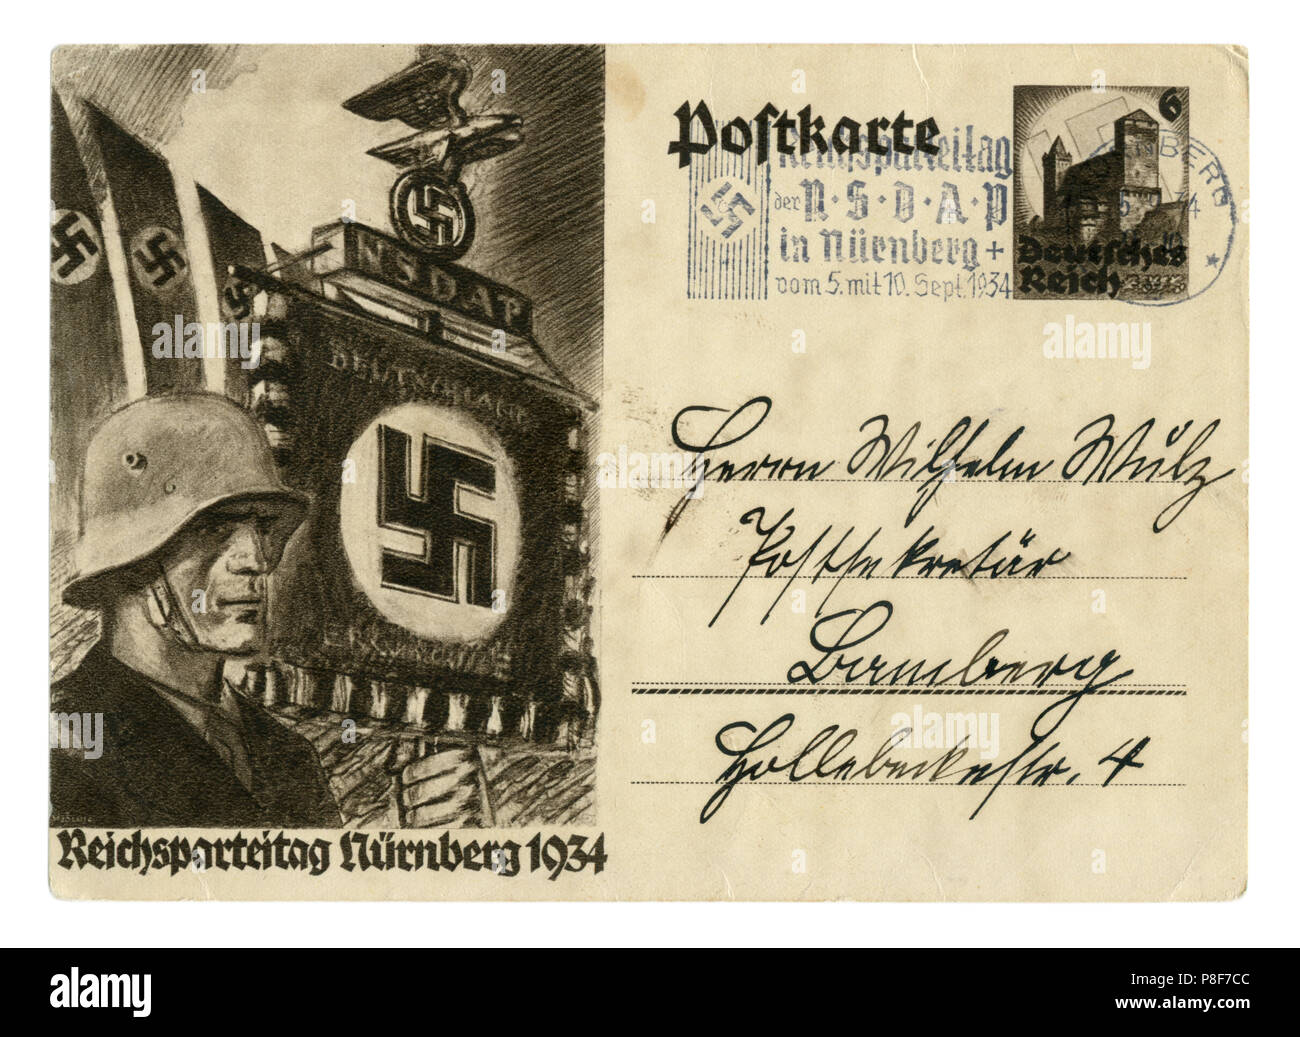 German historical postal card: The 6th party Congress of the NSDAP in Nuremberg in 1934, SS standard bearer in a steel helmet. Germany, Third Reich Stock Photo